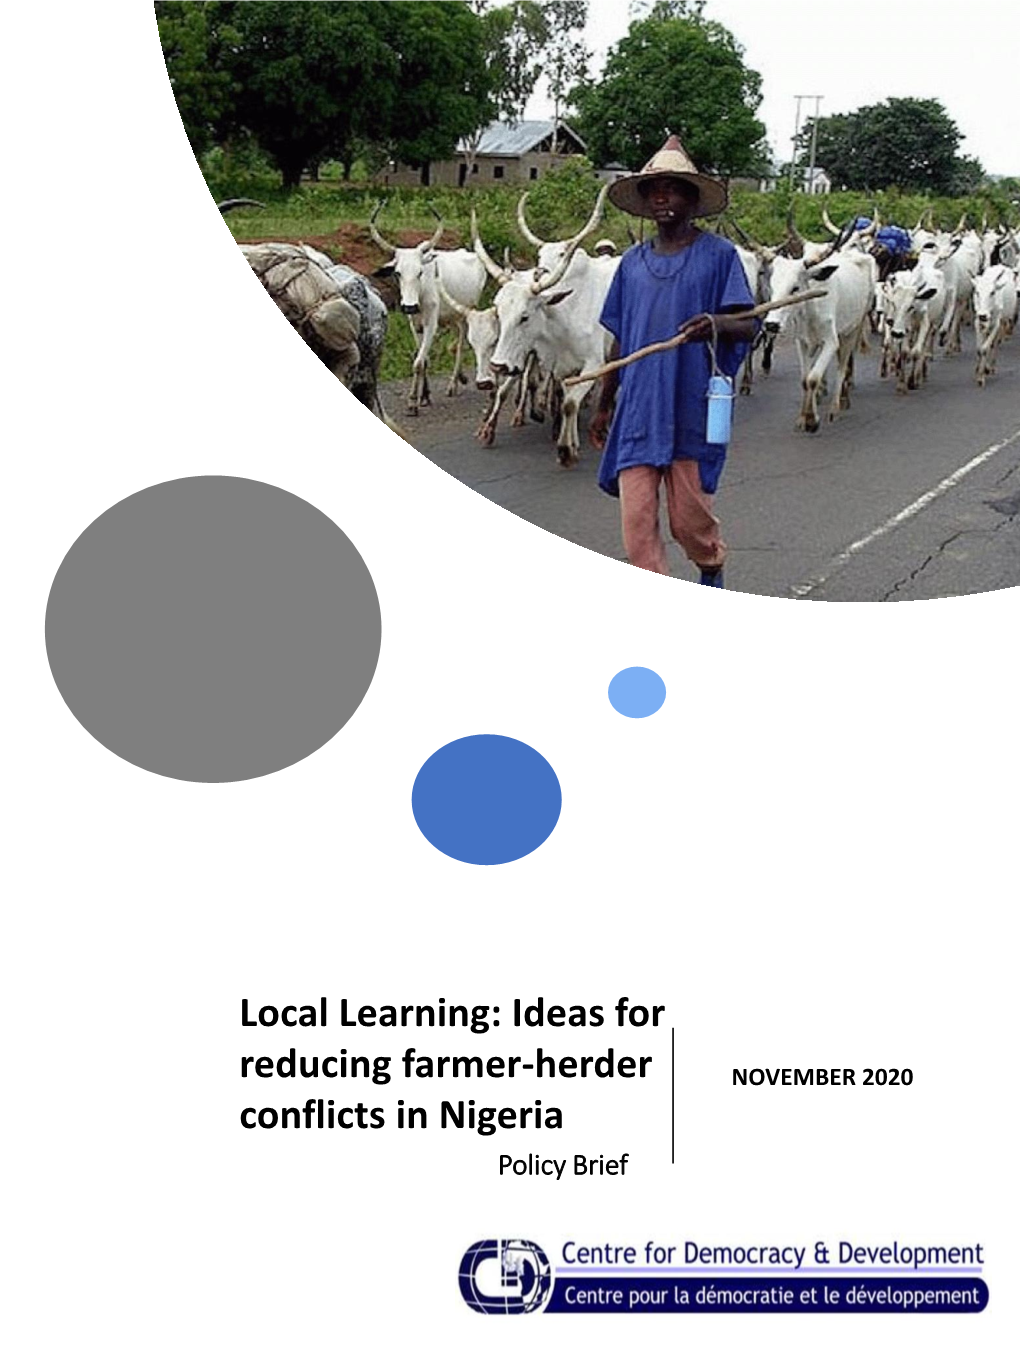 Ideas for Reducing Farmer-Herder Conflicts in Nigeria